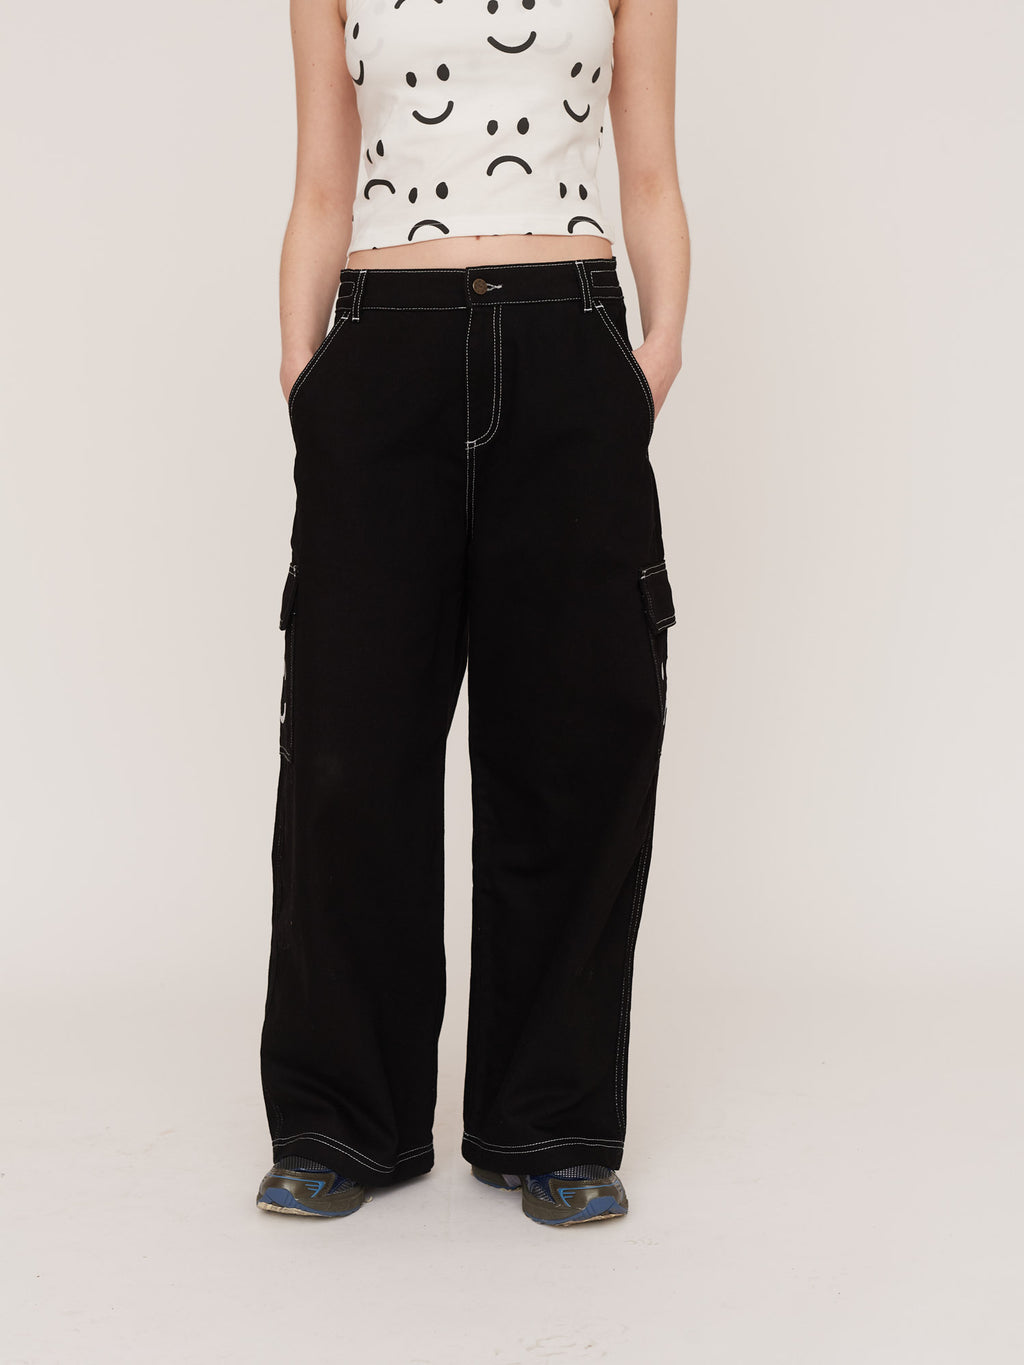 collection-women-landing,collection-women-new-in-1,collection-womens-trousers